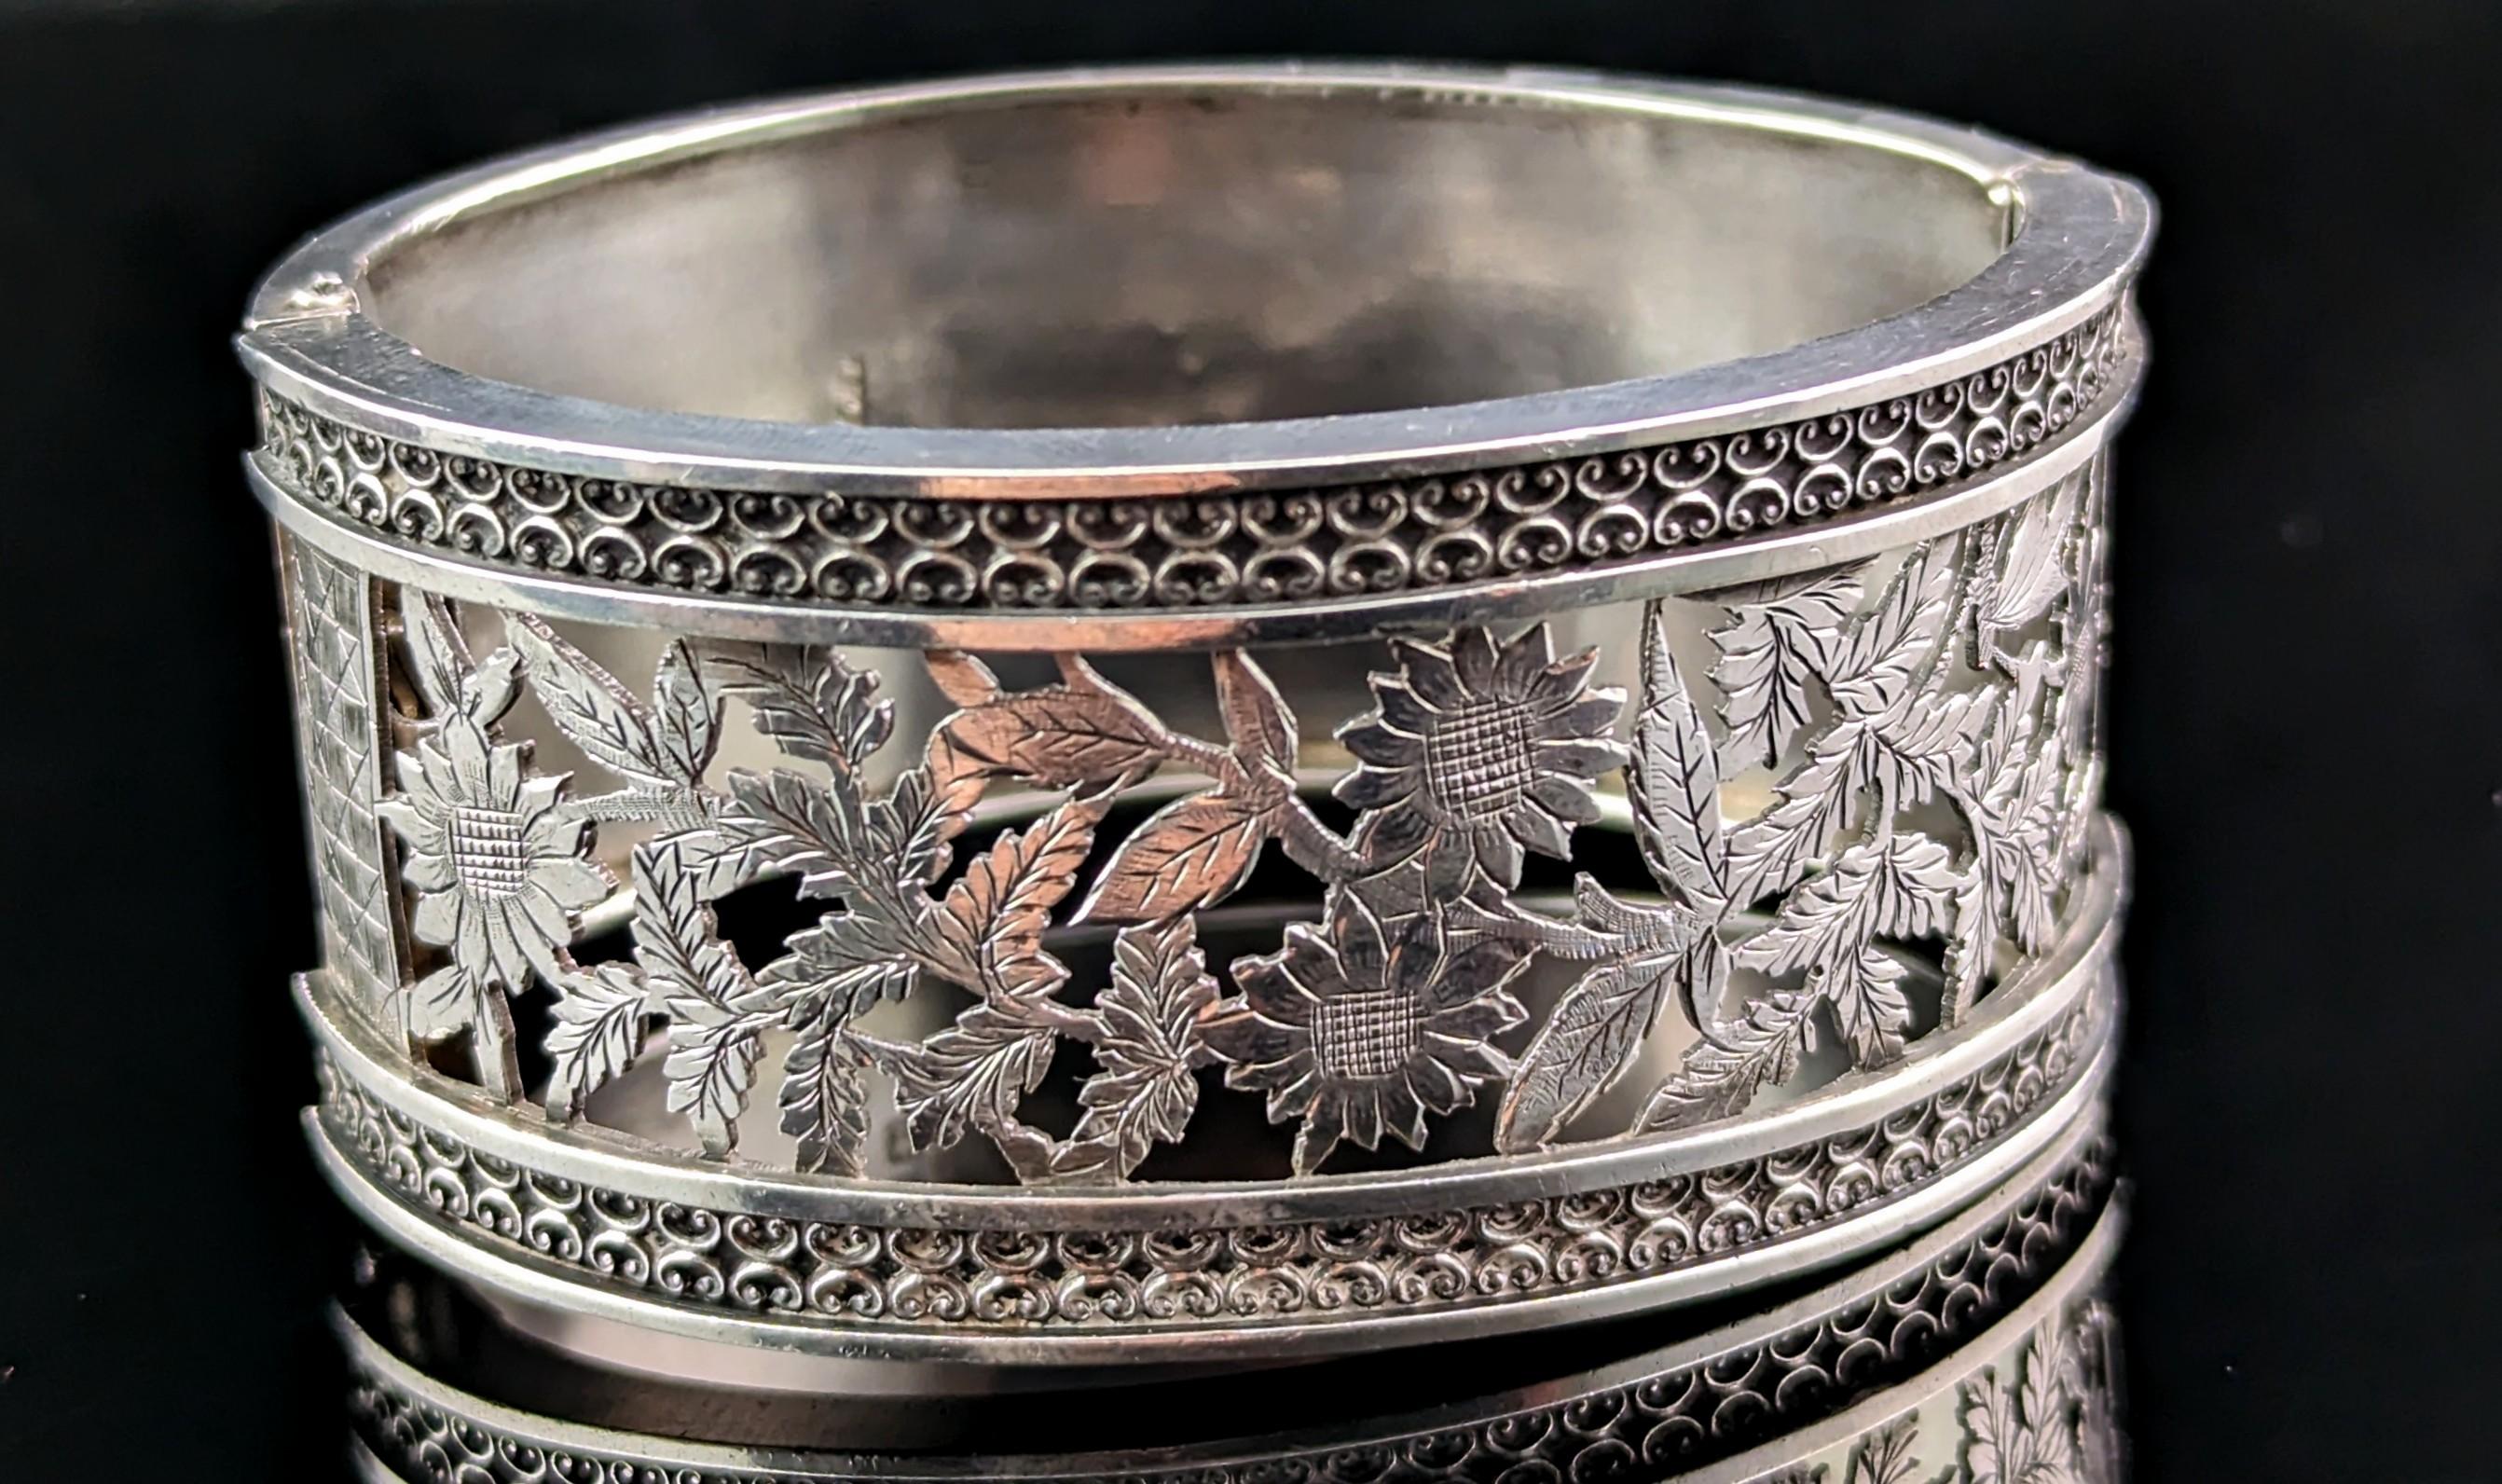 Aesthetic Movement Antique Victorian Silver Cuff Bangle, Pierced Floral Design, Monogrammed